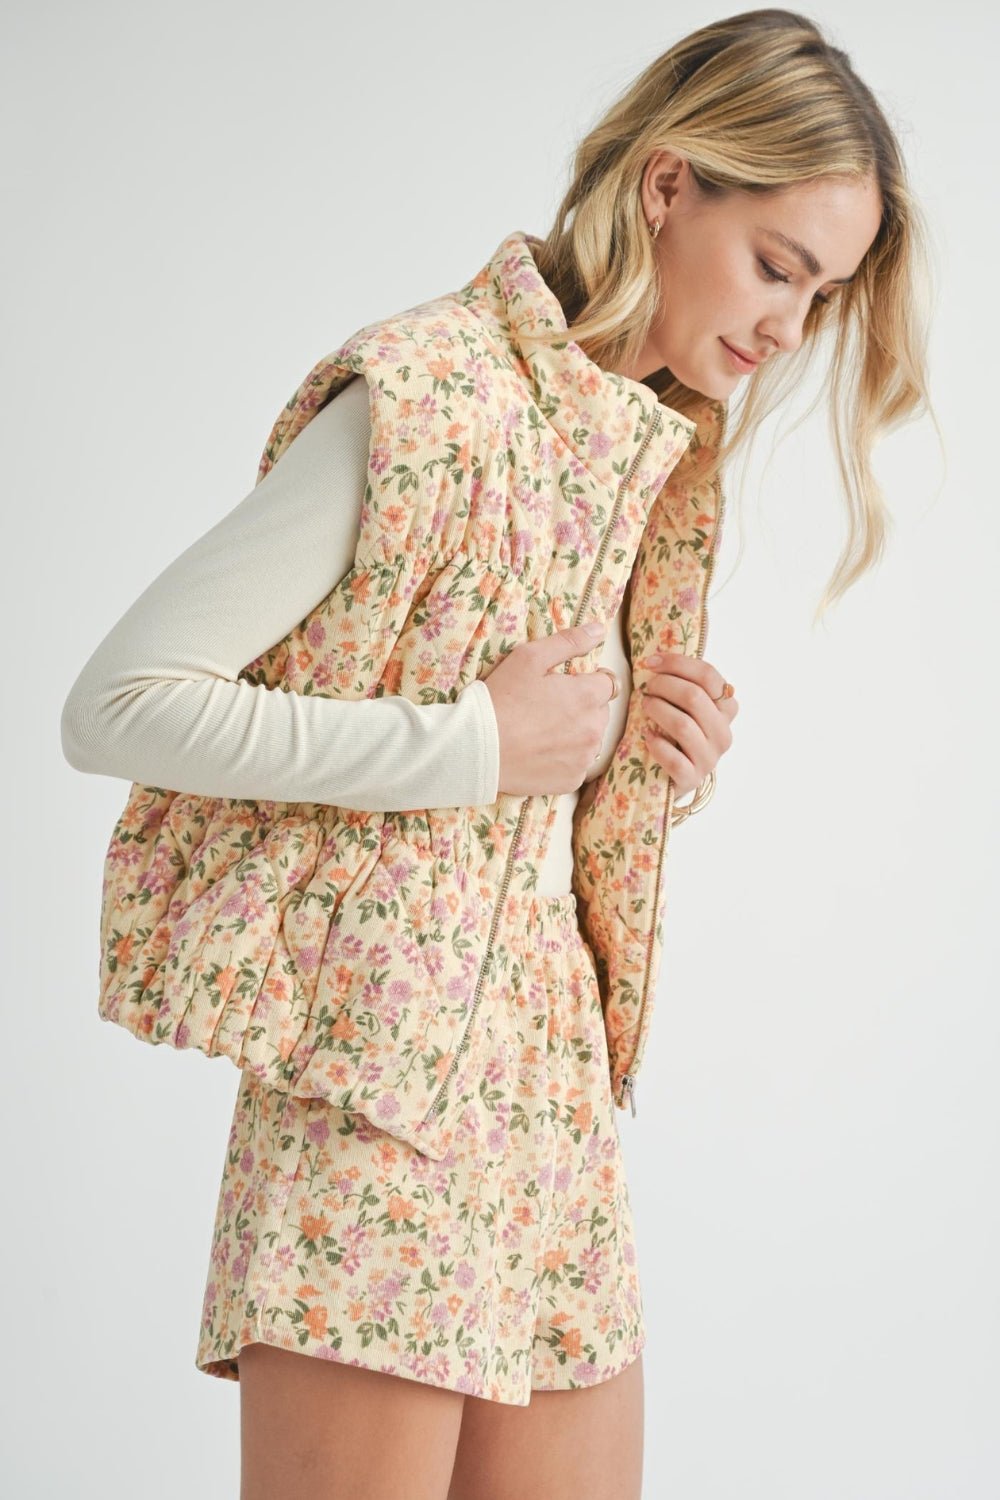 Women's Floral Baby Corduroy Puffer Vest | Cream Yellow - Women's Jacket - Blooming Daily